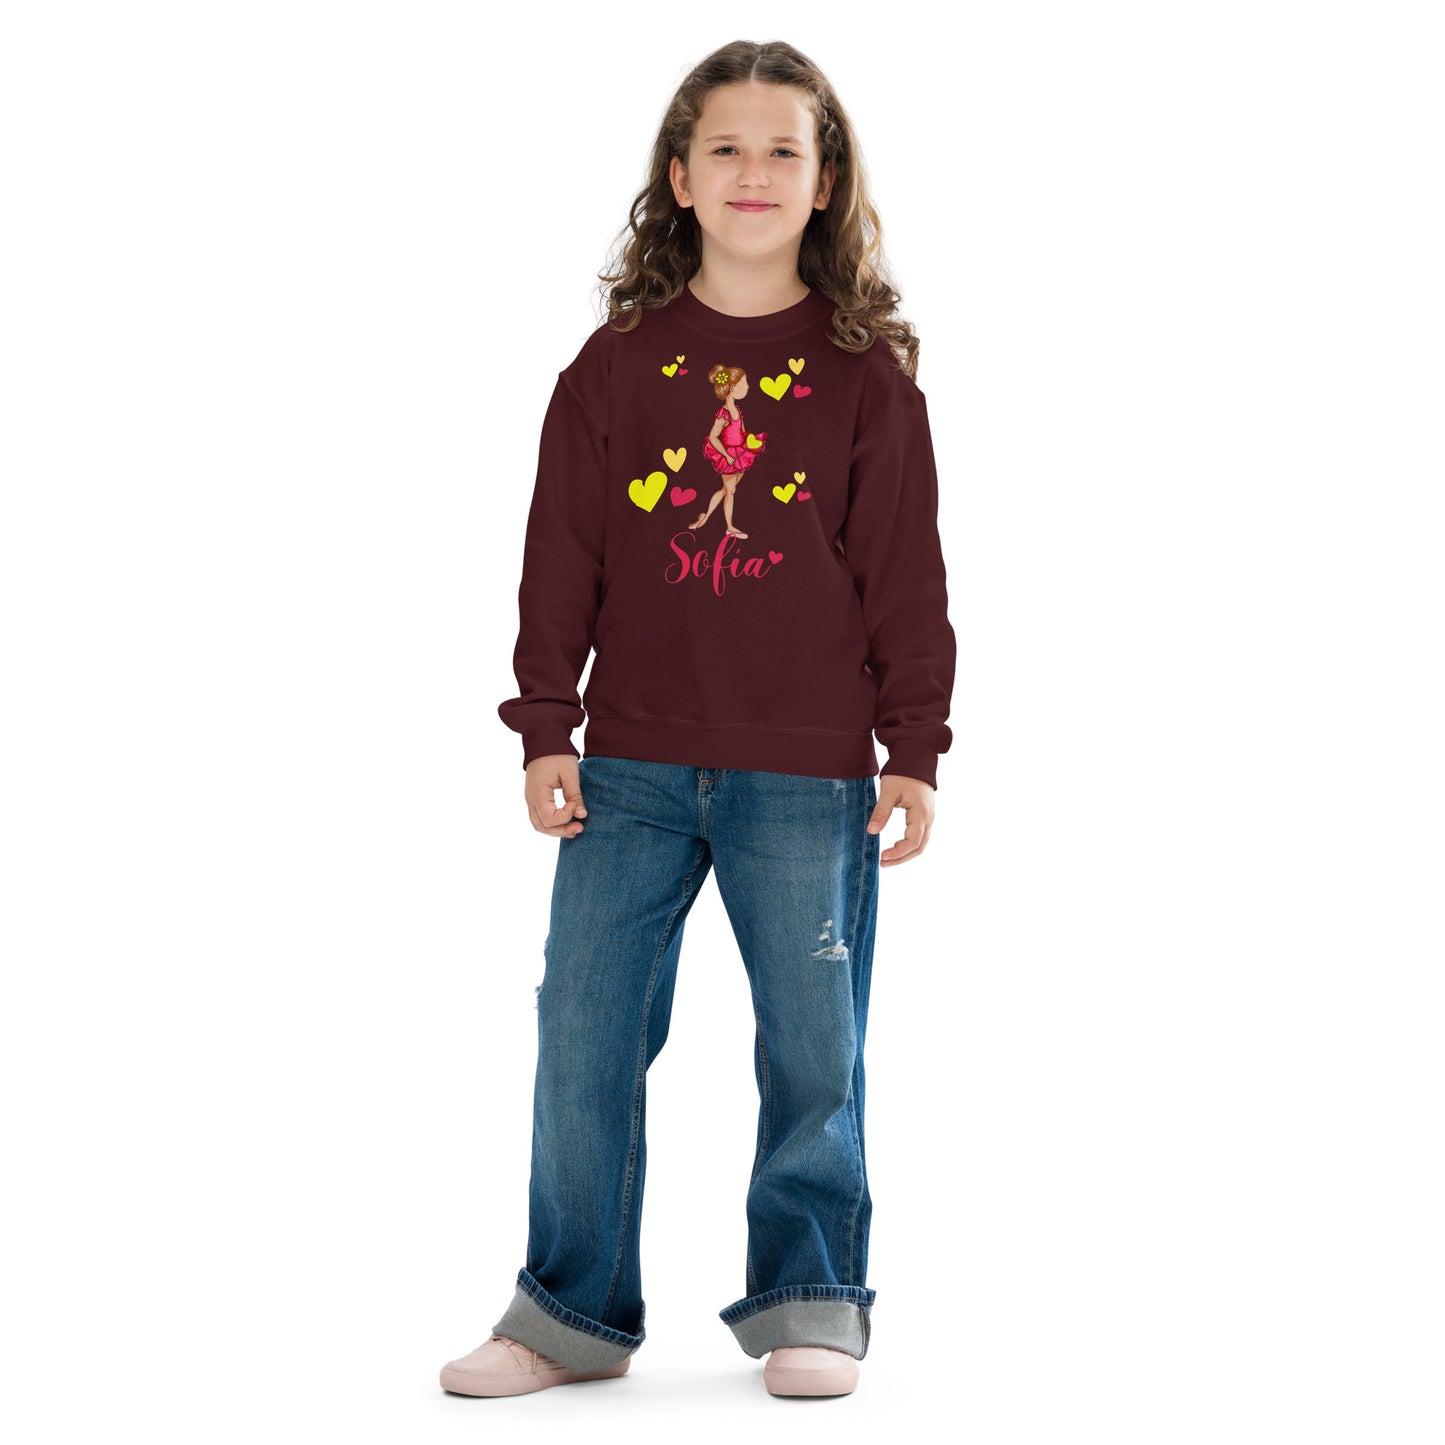 a young girl wearing a maroon sweatshirt with hearts on it